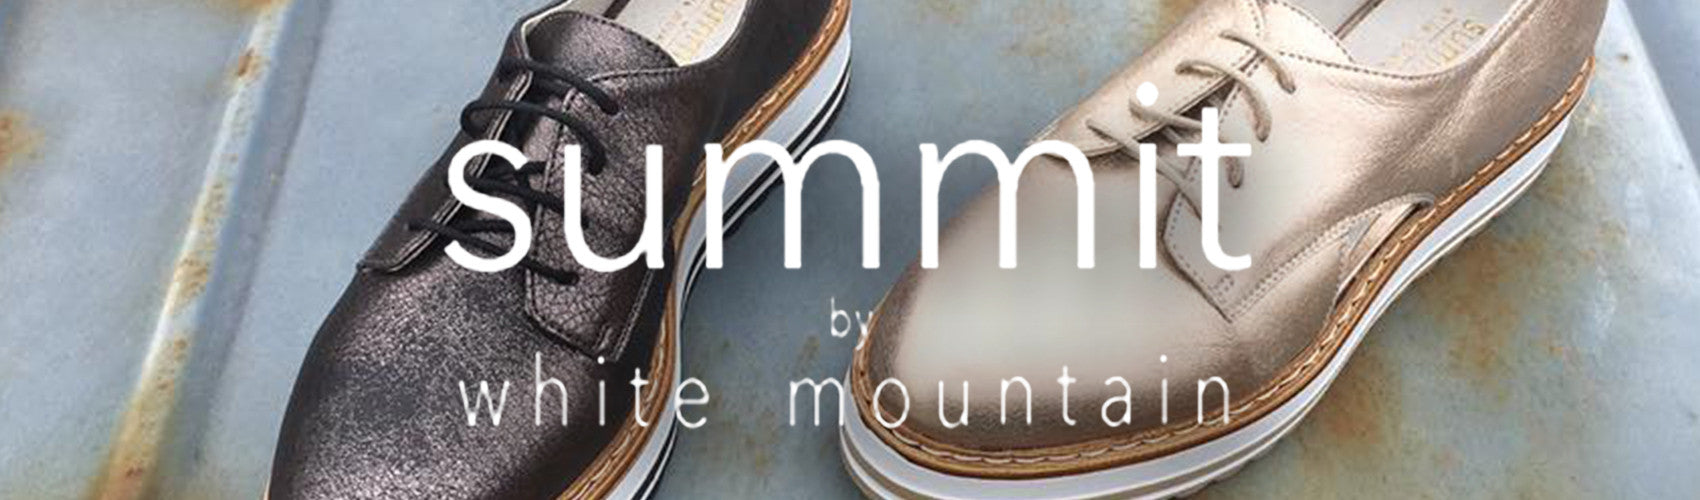 Summit by White Mountain. Italian made shoes designed in fine leather